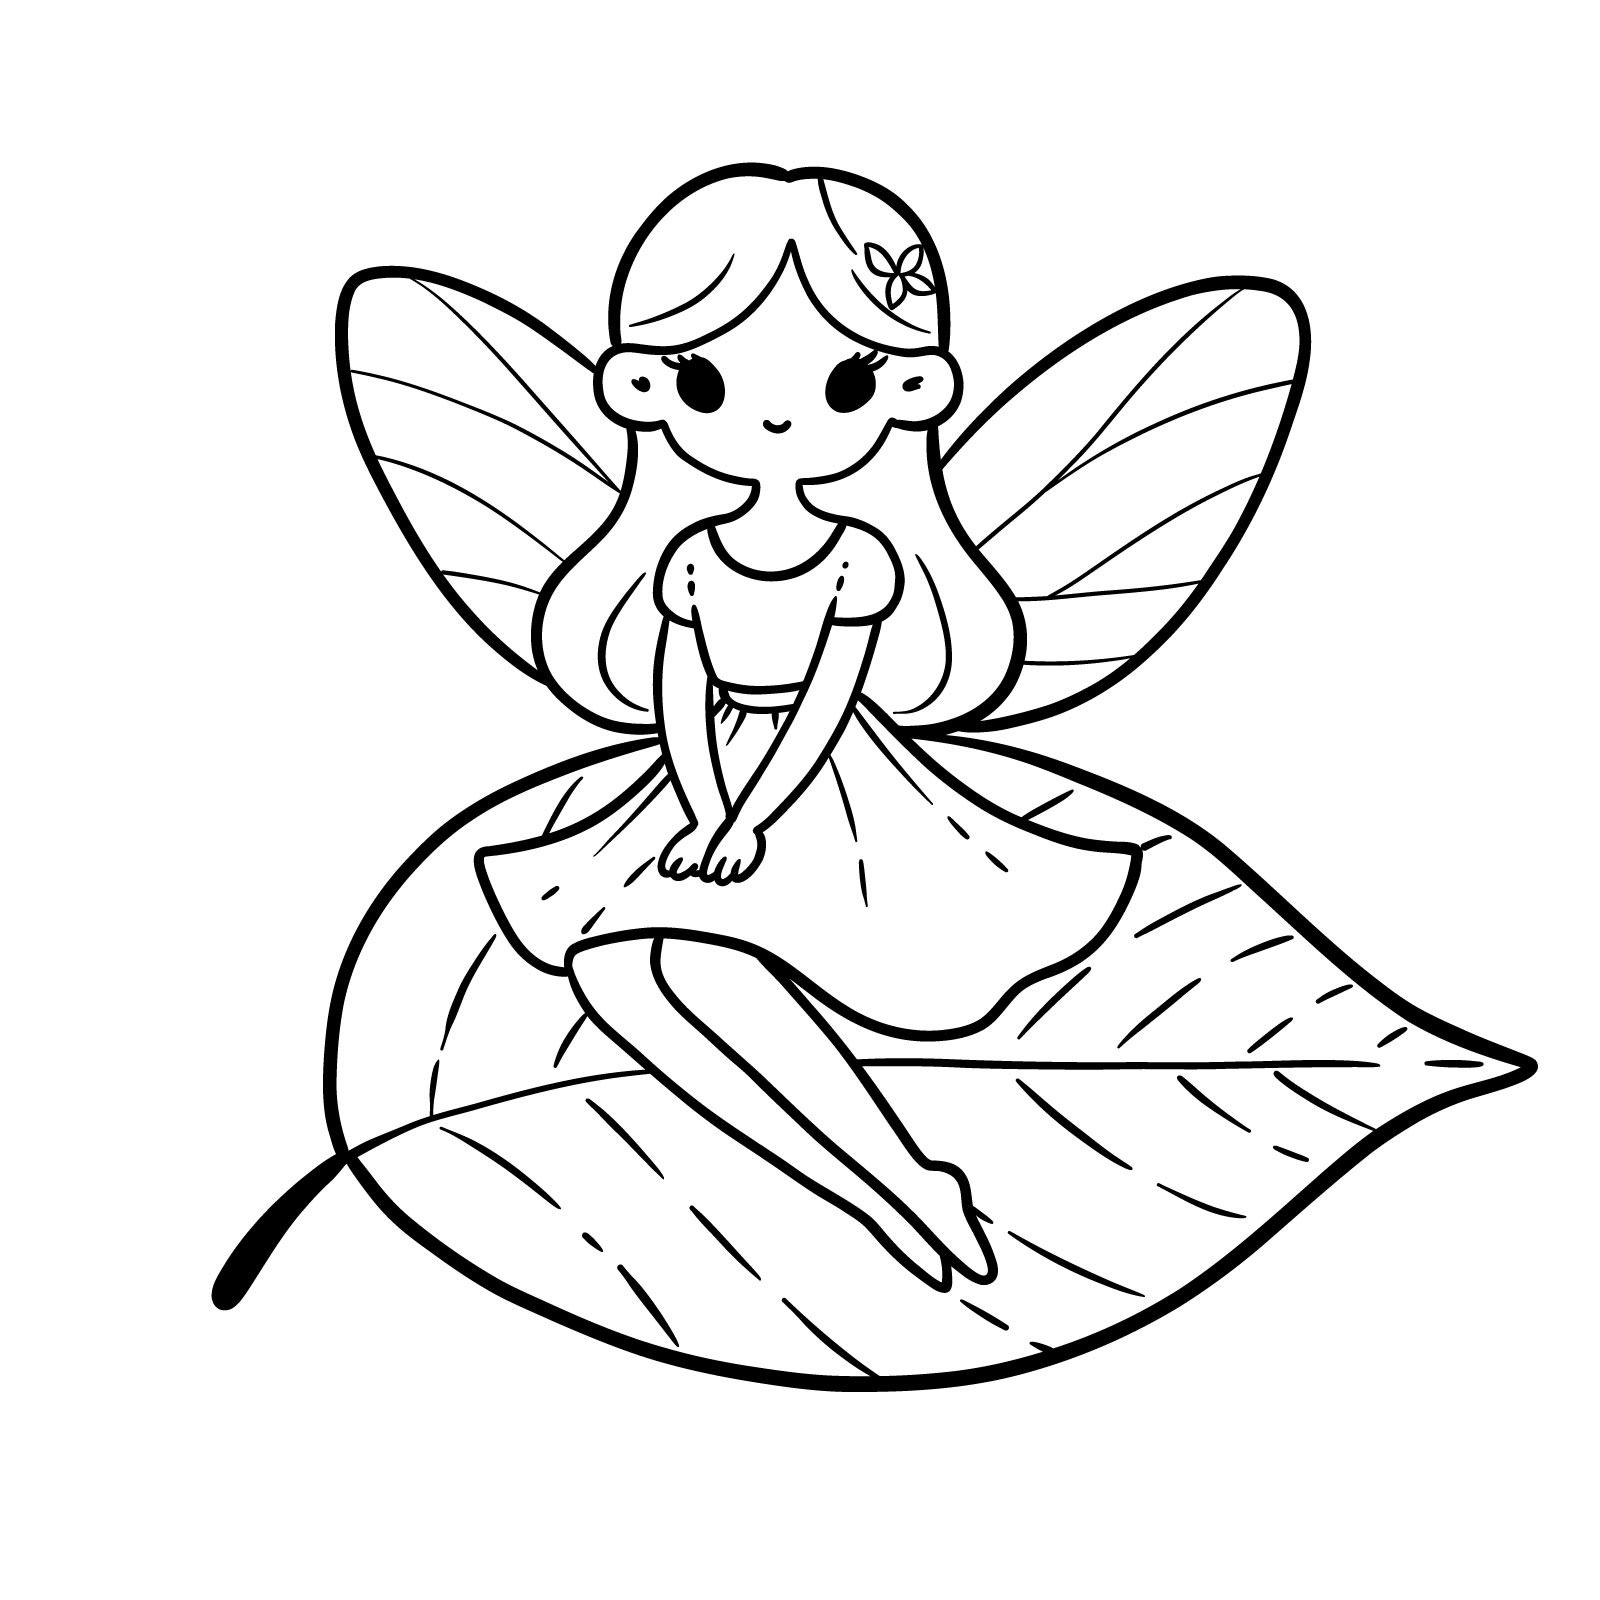 Finished line drawing of a fairy sitting on a detailed leaf with patterned wings - final step